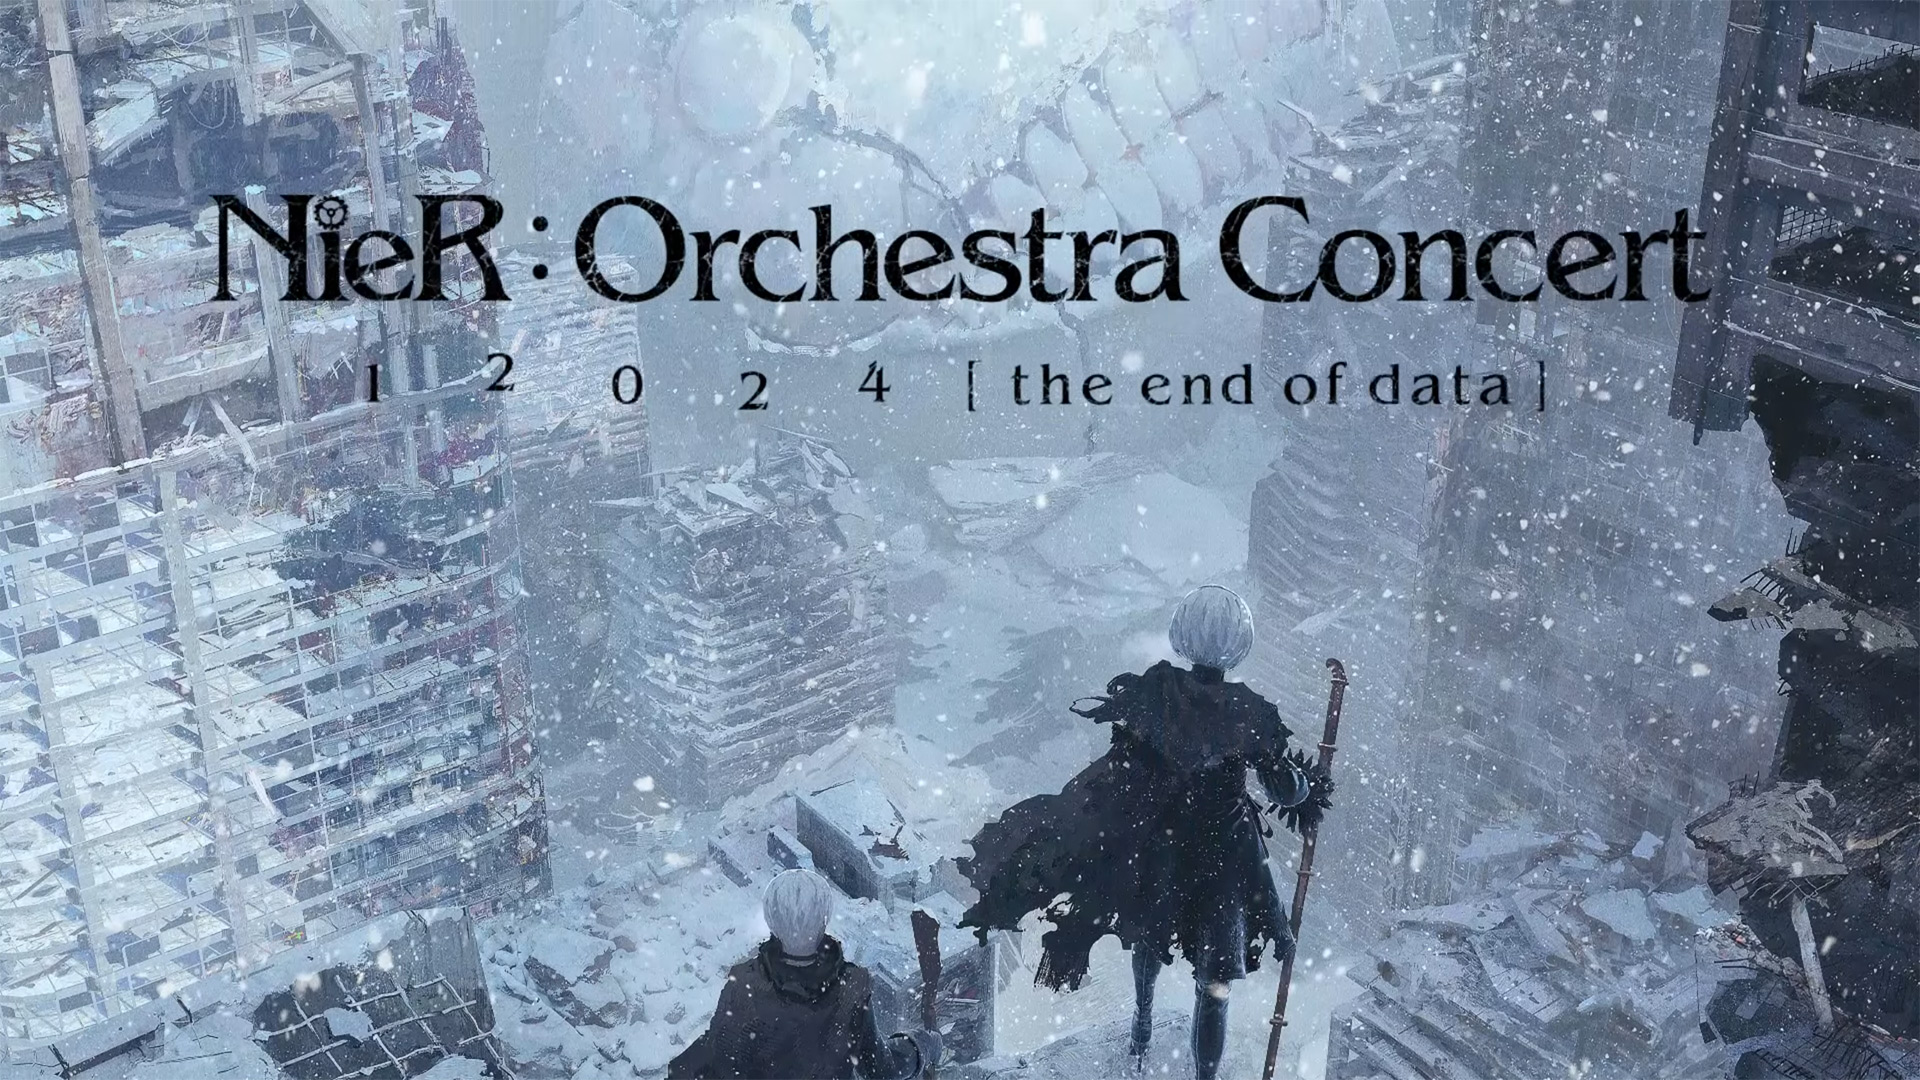 There are currently eight stops announced for the NieR:Orchestra Concert Tour